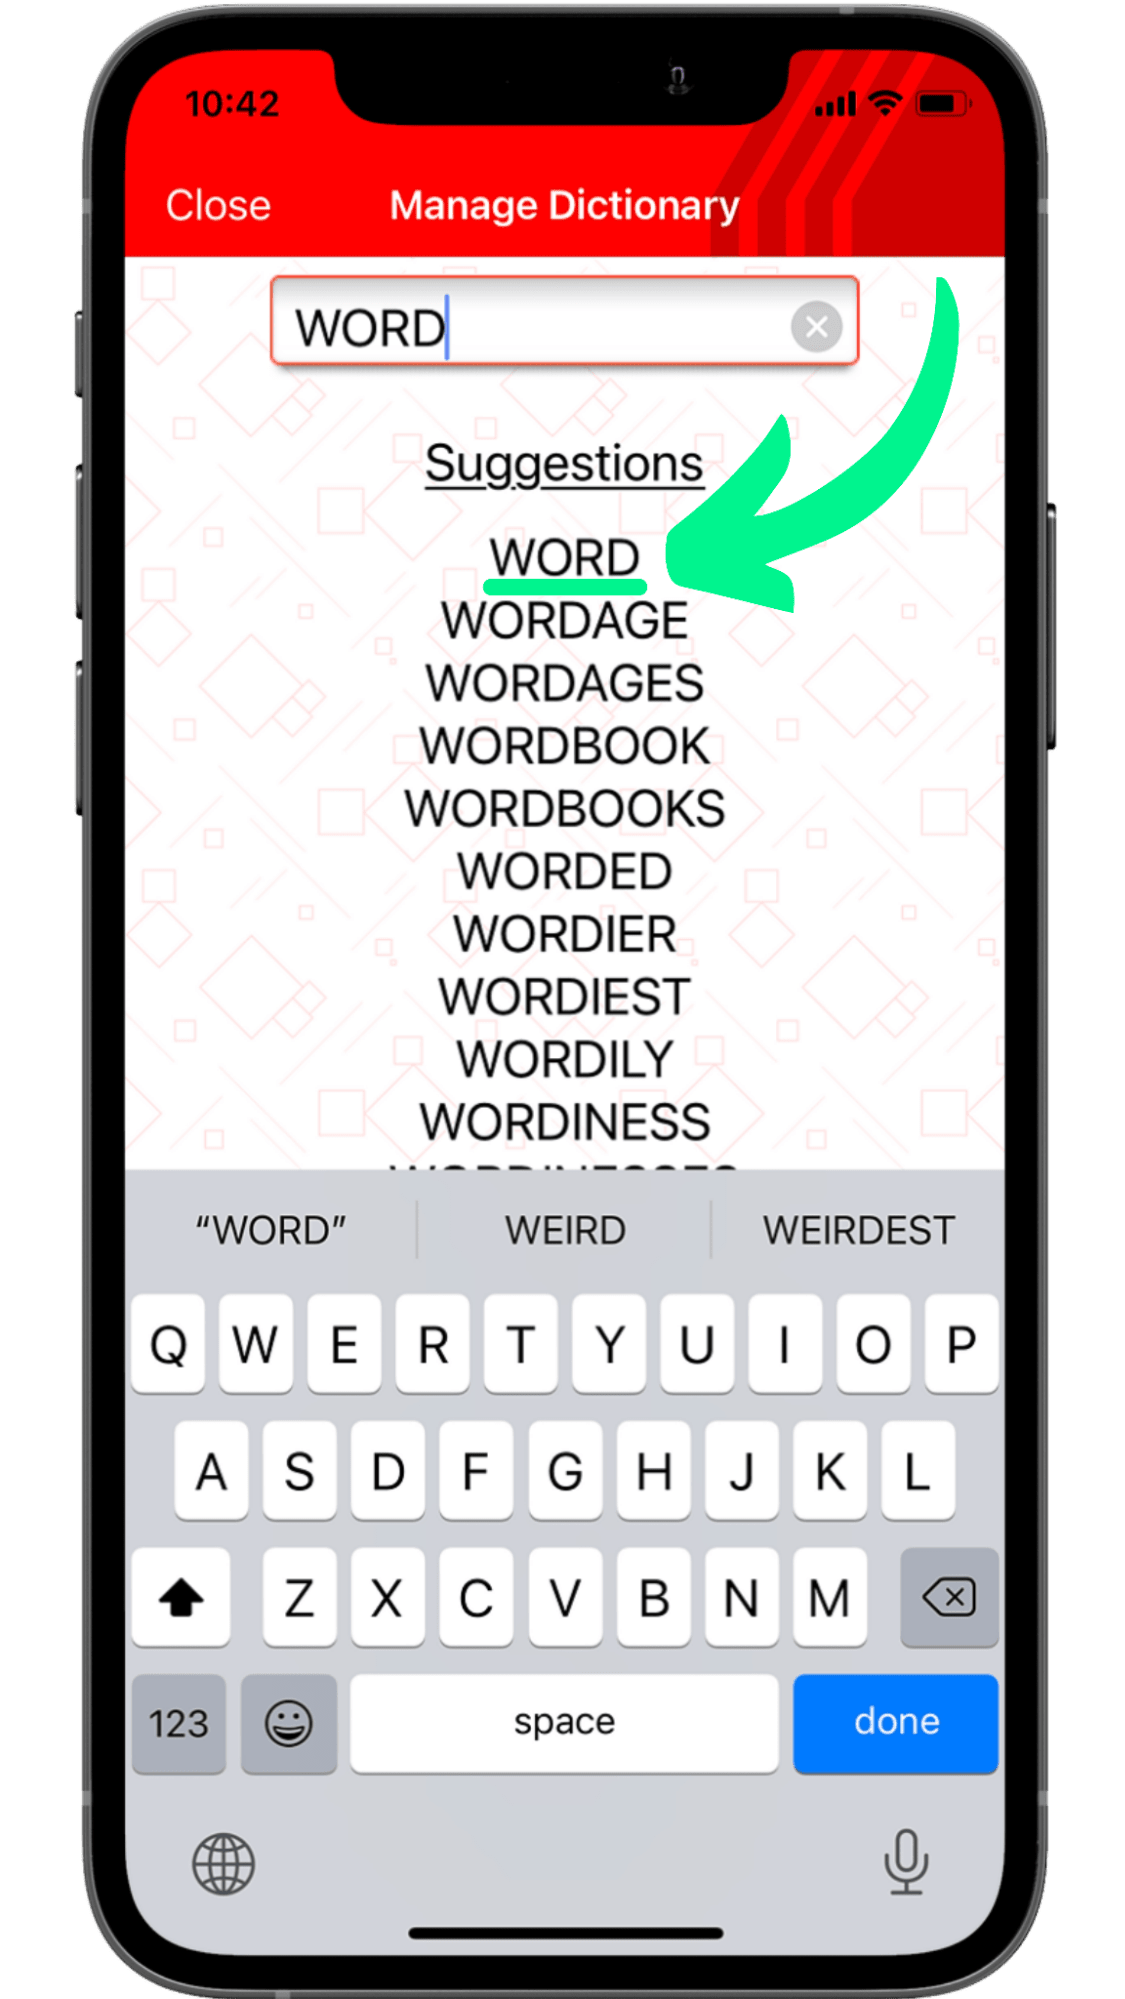 Select your word in the Suggestions list